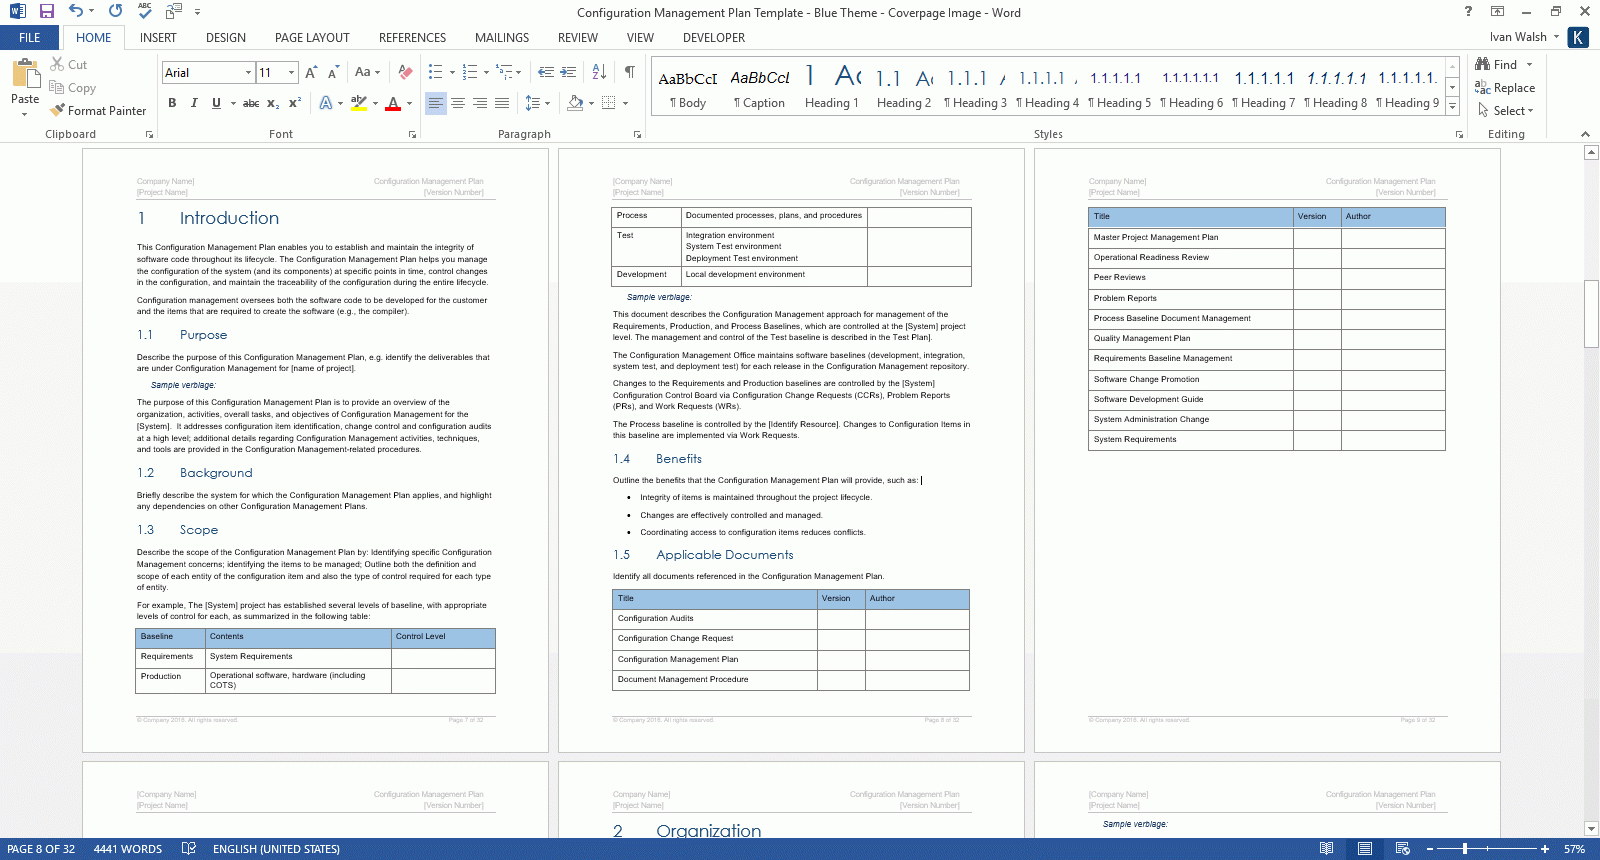 Configuration Management Plan Templates (Ms Office) With Training Manual Template Microsoft Word